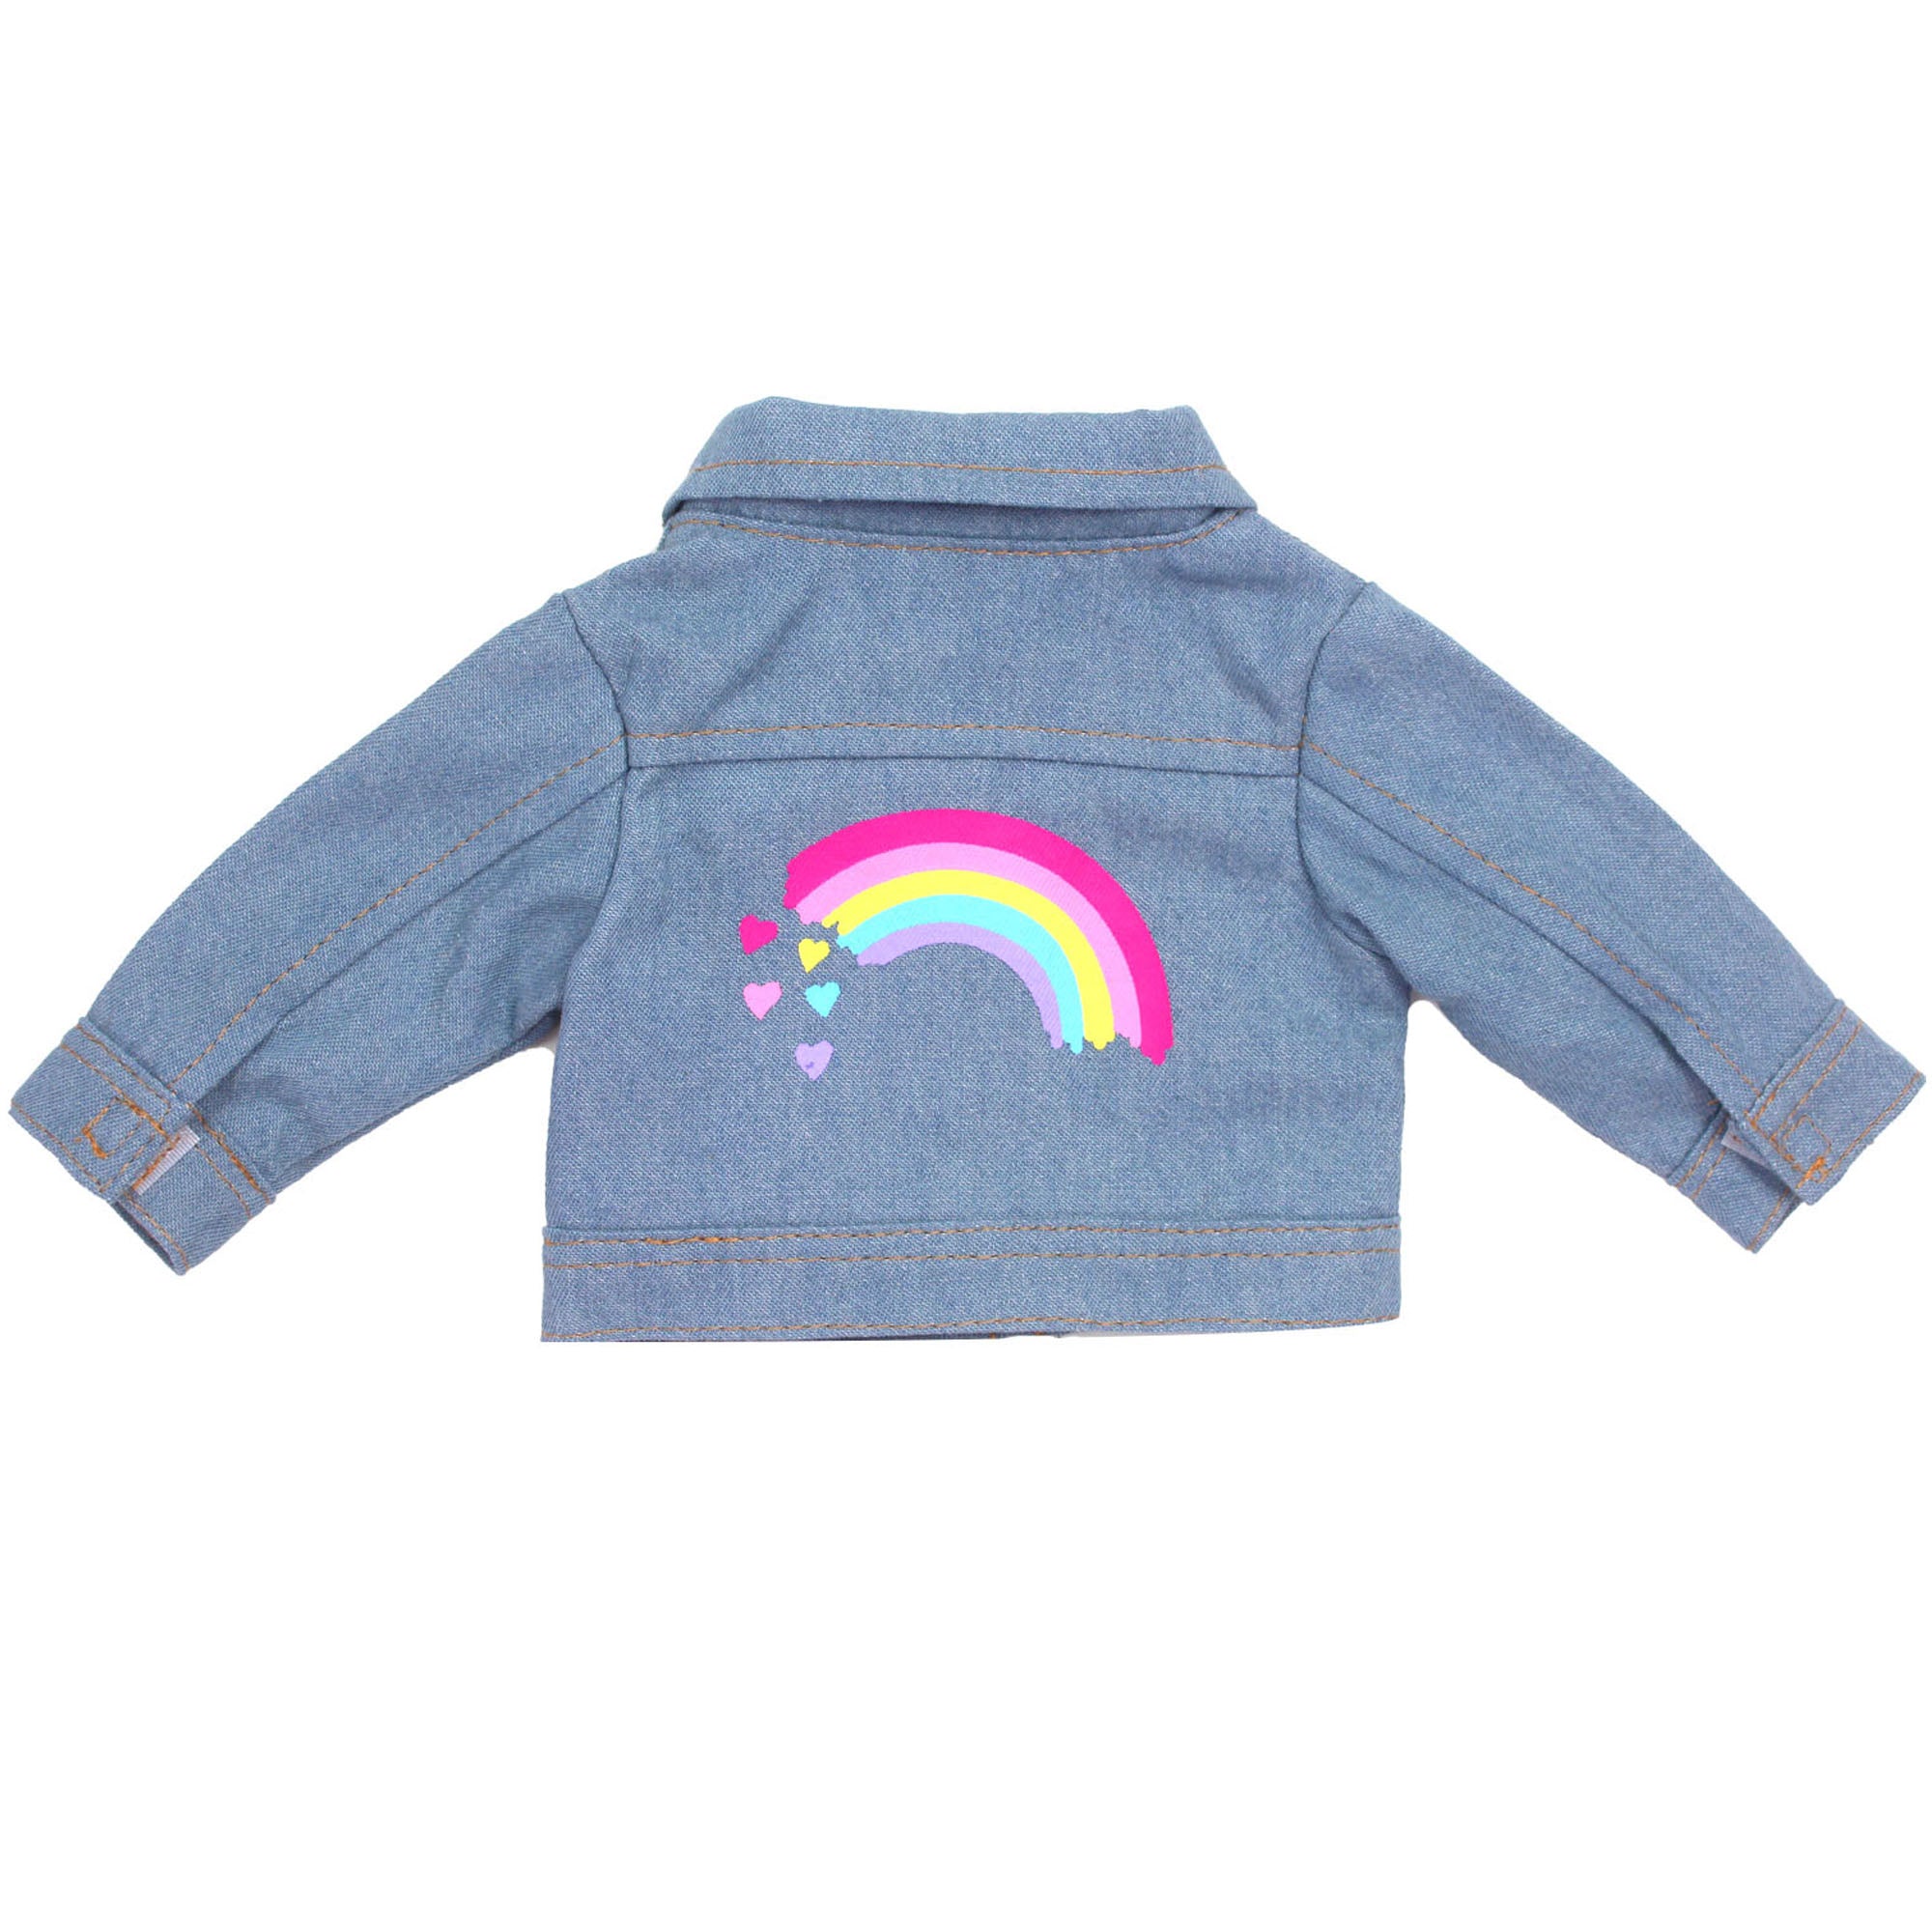 Sophia's Jean Jacket with Rainbow Graphic for 18" Dolls, Blue